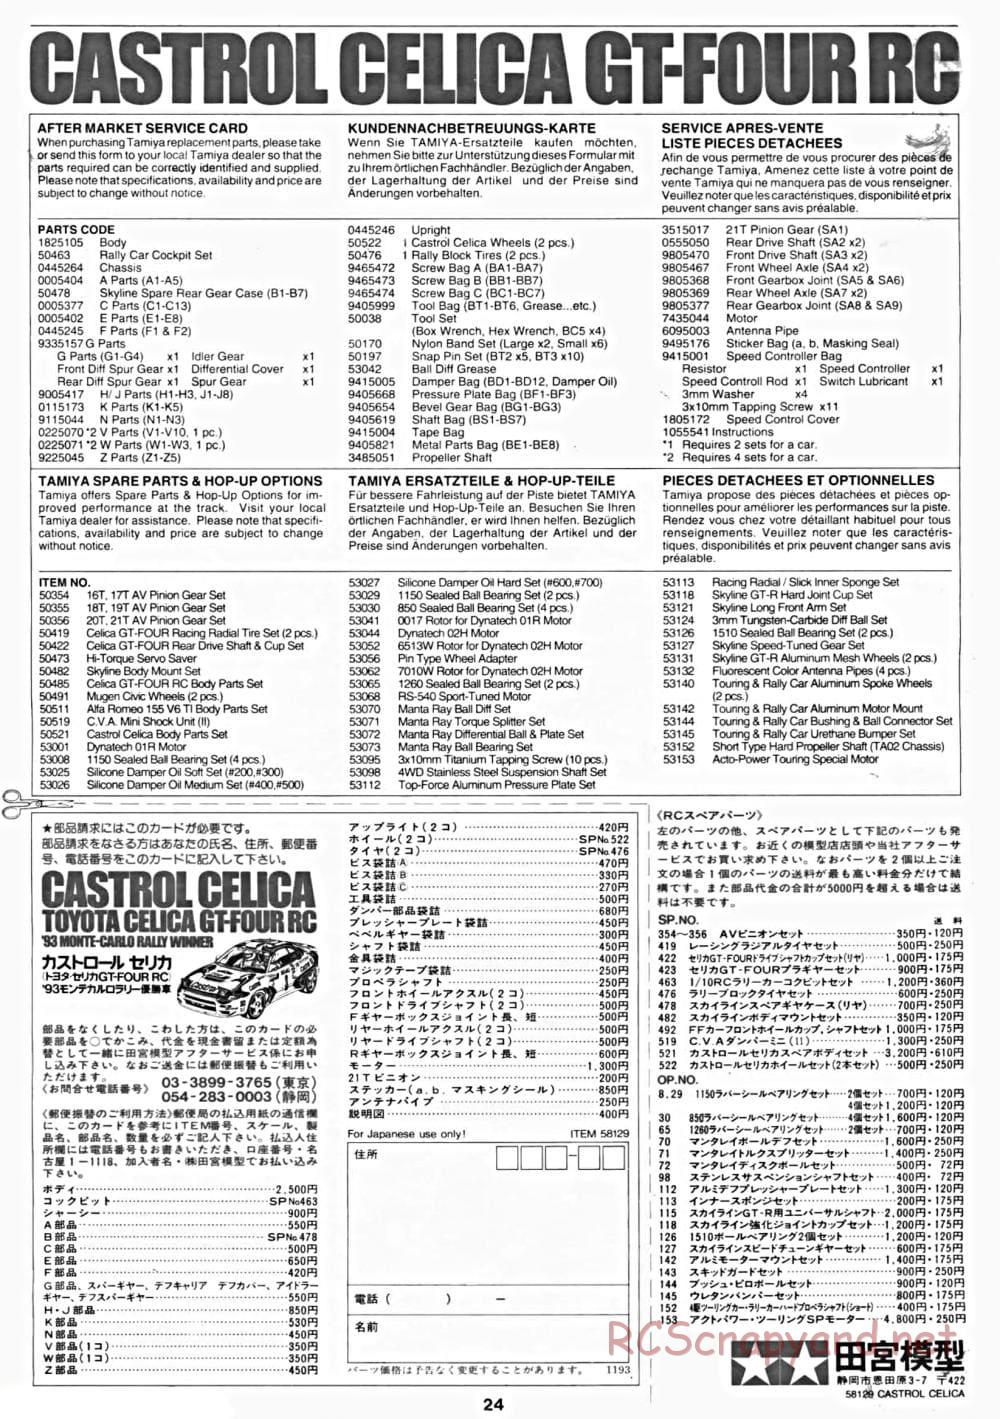 Tamiya - Castrol Celica 93 Monte-Carlo - TA-02 Chassis - Manual - Page 24